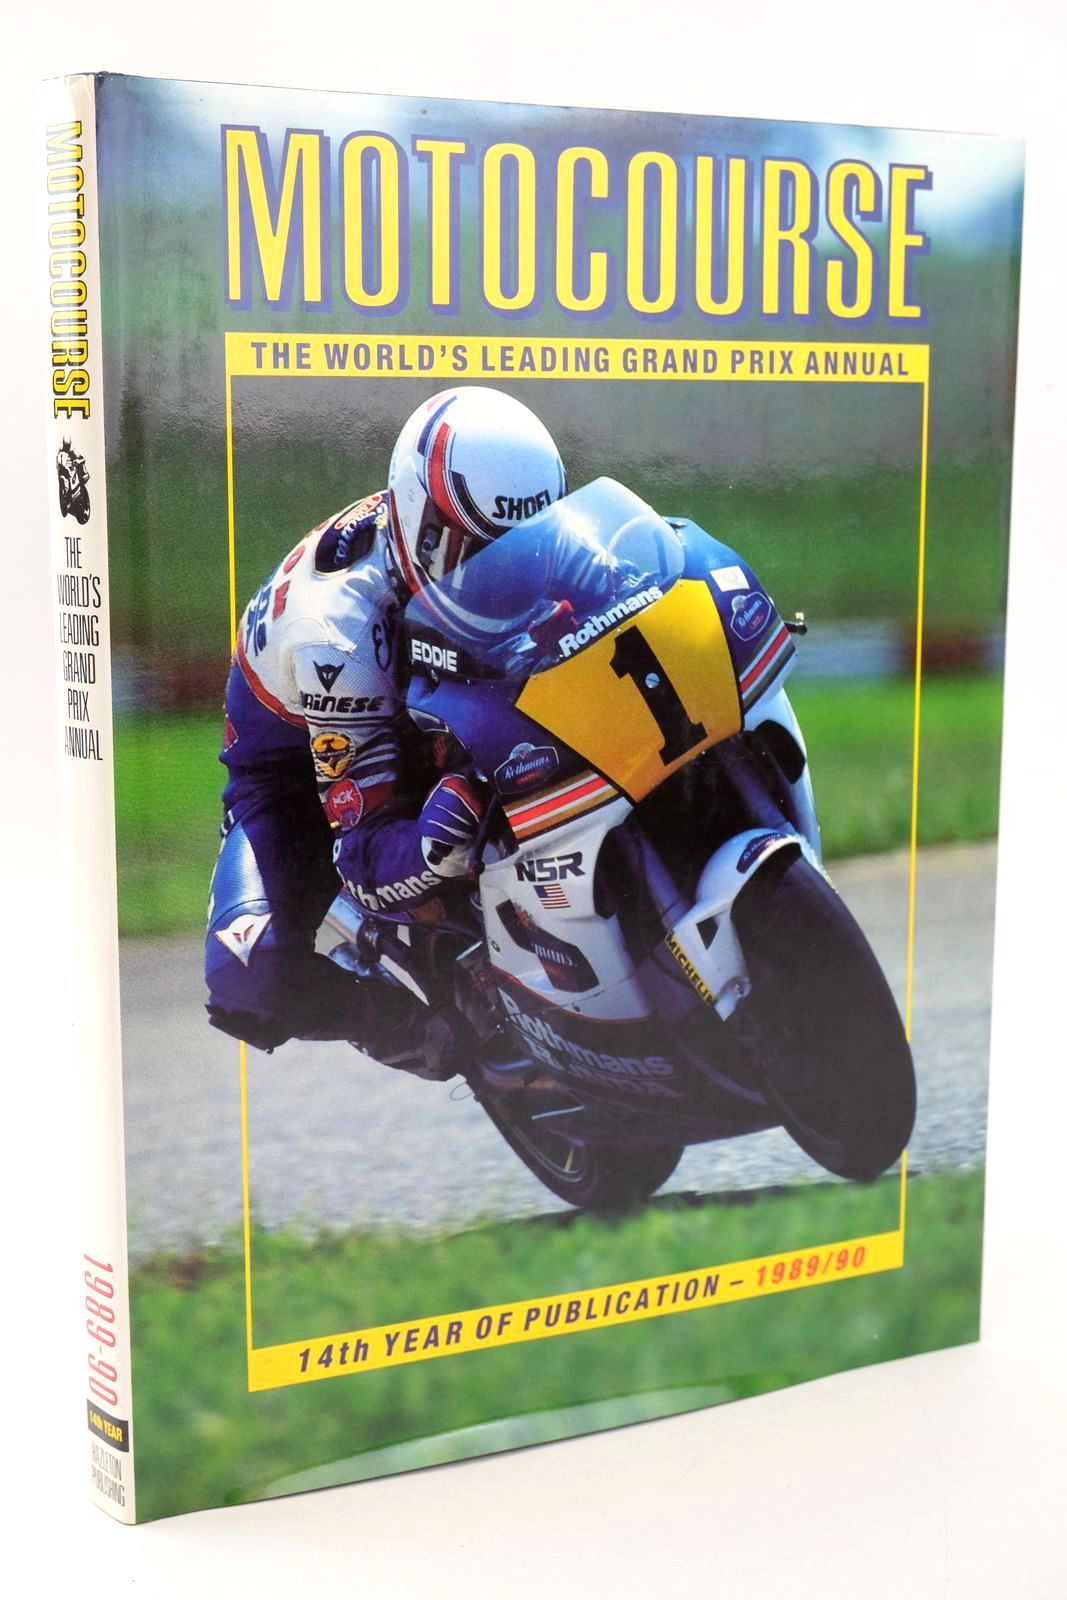 Photo of MOTOCOURSE 1989-90 written by Clifford, Peter published by Hazleton Publishing (STOCK CODE: 1319320)  for sale by Stella & Rose's Books